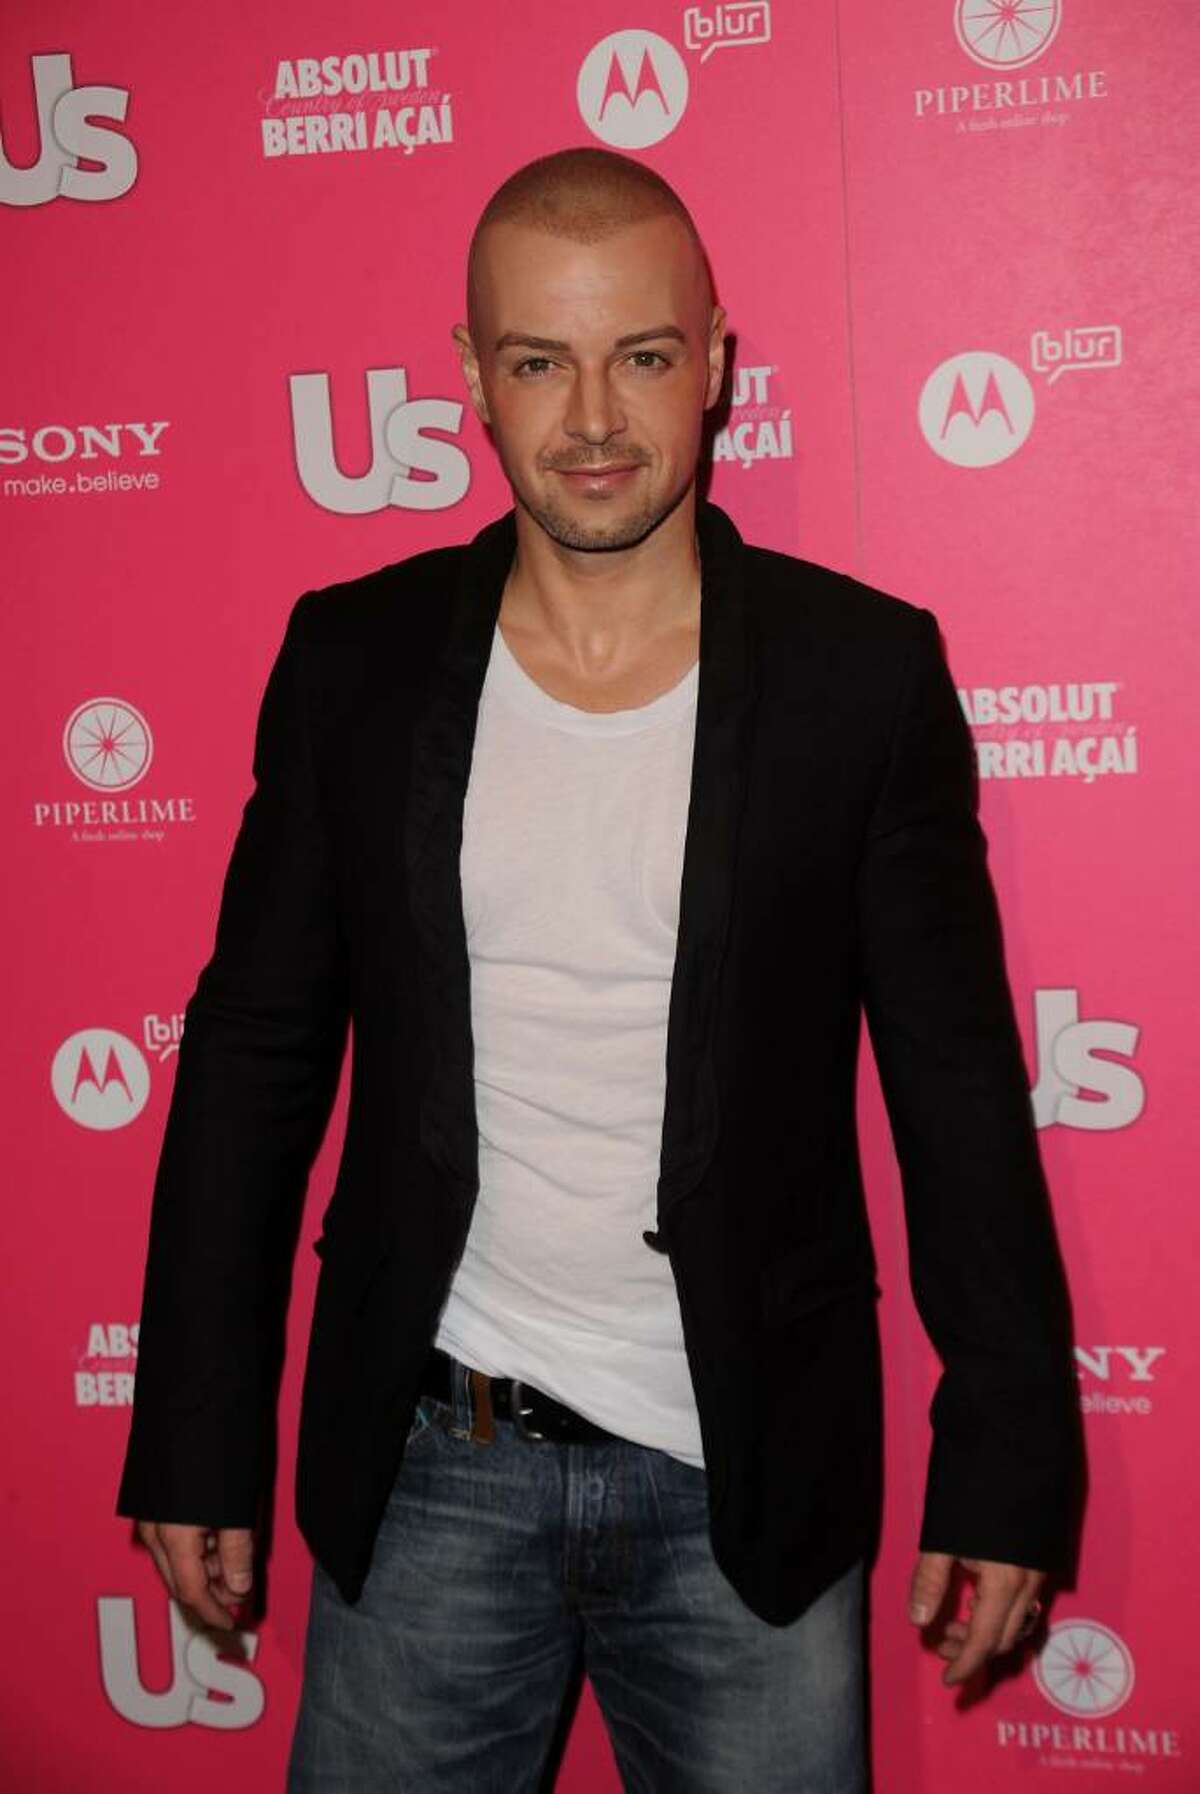 HOLLYWOOD - APRIL 22: Actor Joey Lawrence arrives at the Us Weekly Hot Hollywood Style Issue celebration held at Drai's Hollywood at the W Hollywood Hotel on April 22, 2010 in Hollywood, California. (Photo by Jason Merritt/Getty Images) *** Local Caption *** Joey Lawrence